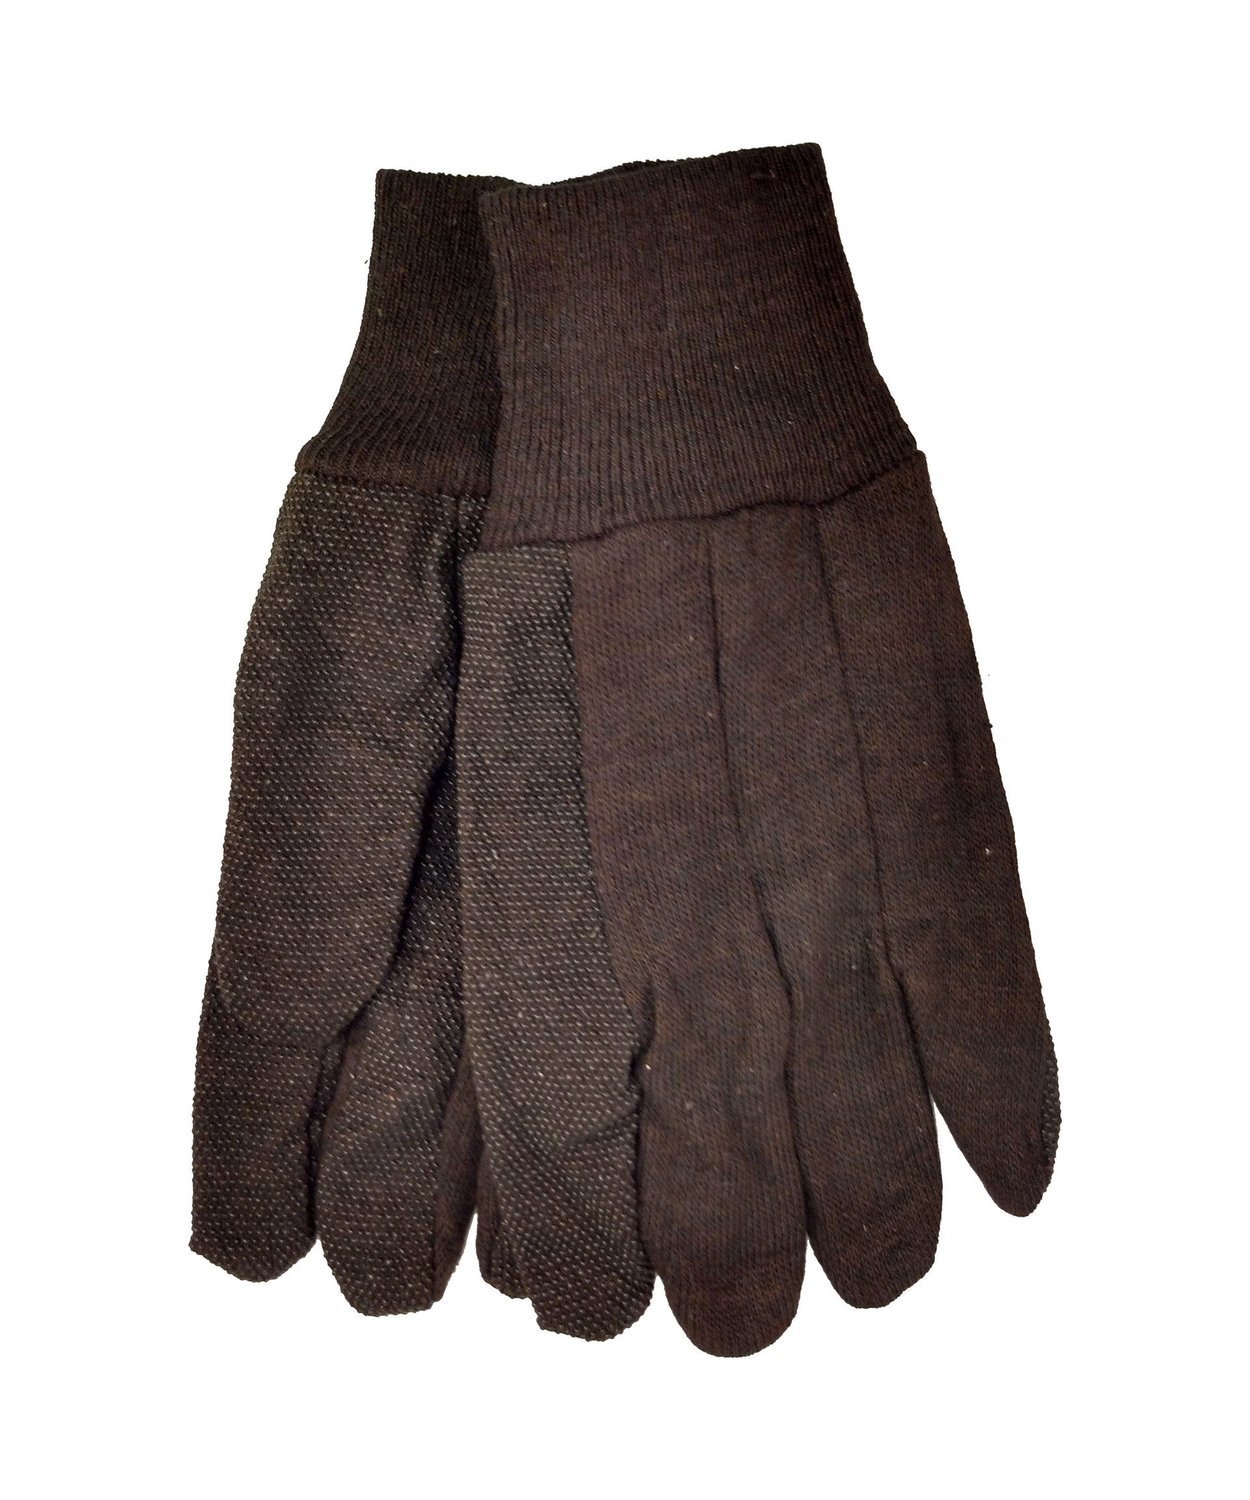 9 Oz Brown Jersey Work Glove With Mini Dots, Sold By The Dozen